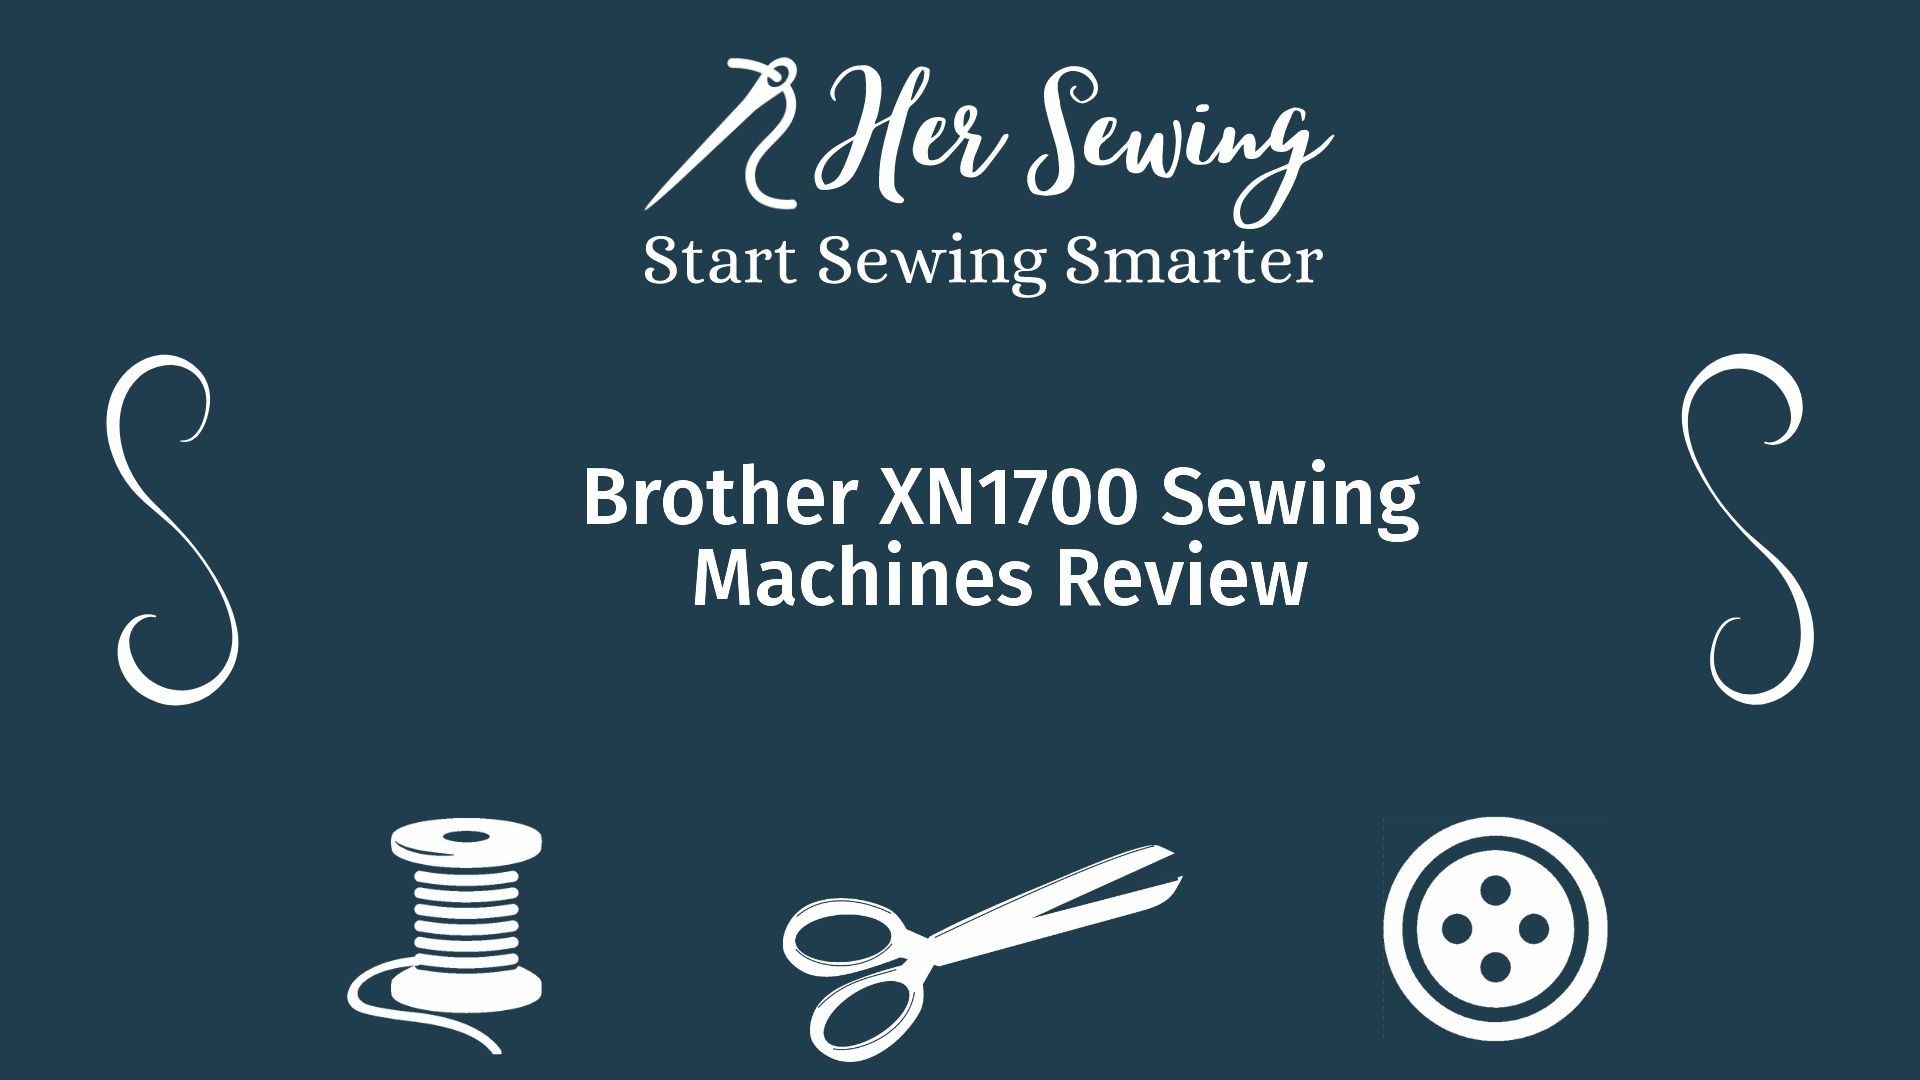 Brother XN1700 Sewing Machines Review